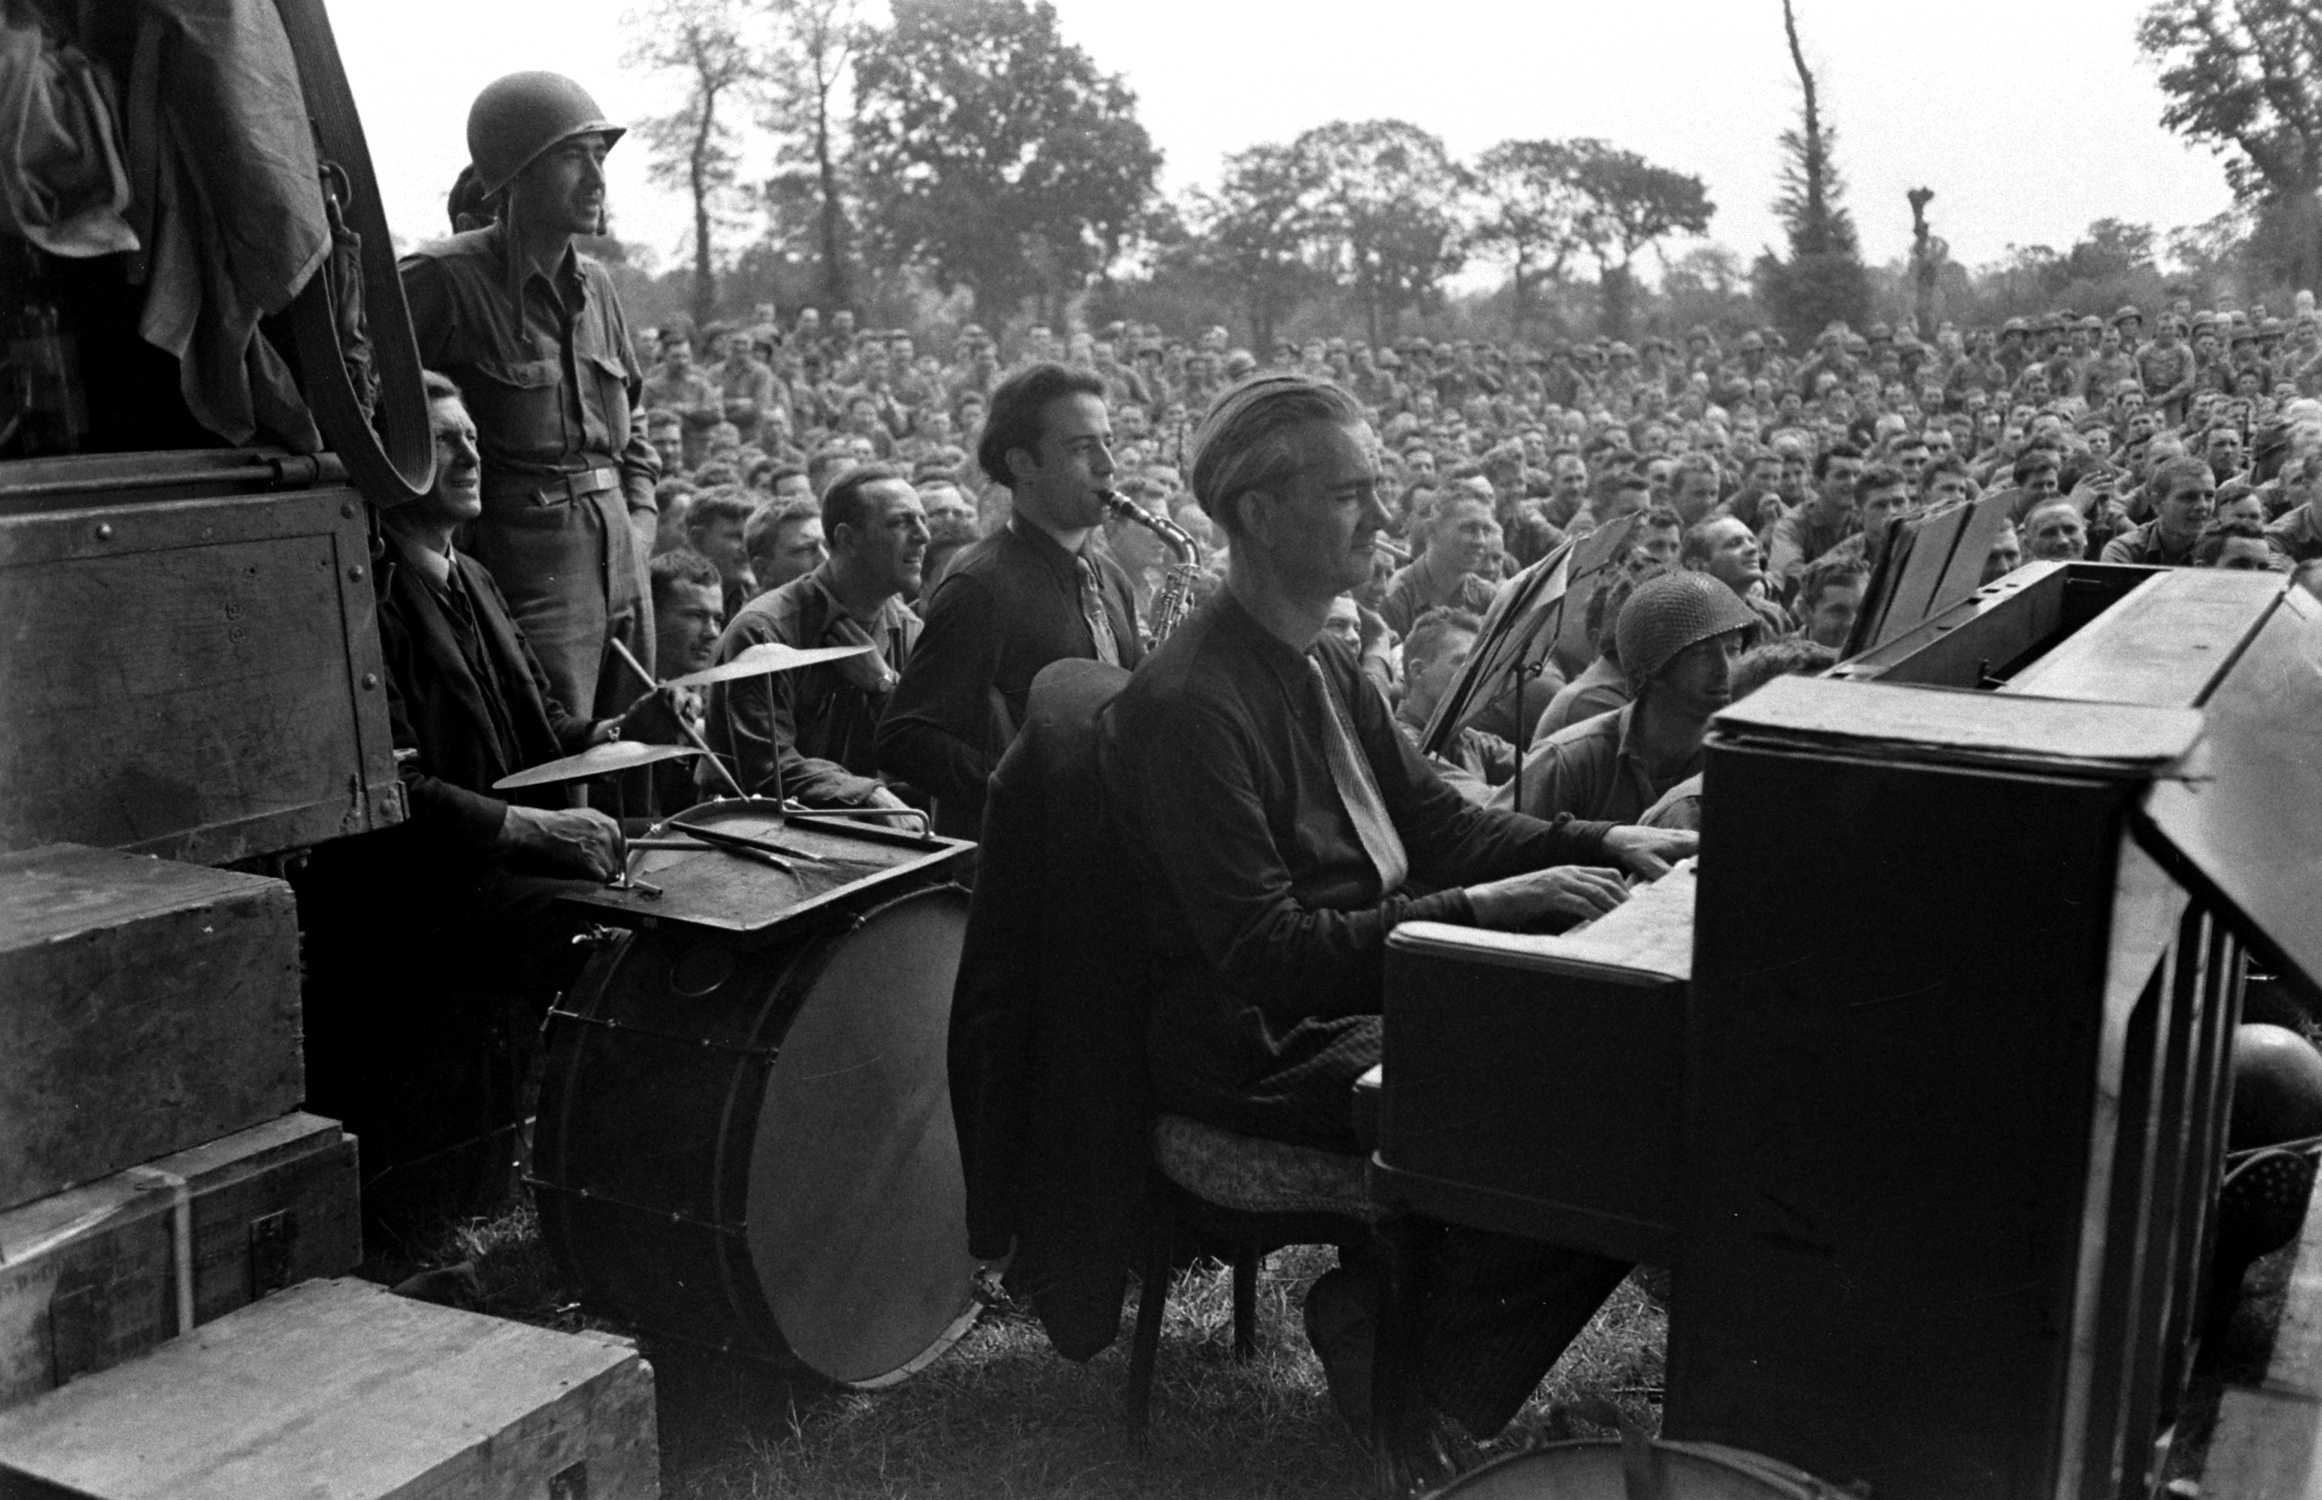 First organized show for American troops after D-Day, Normandy, July 1944.